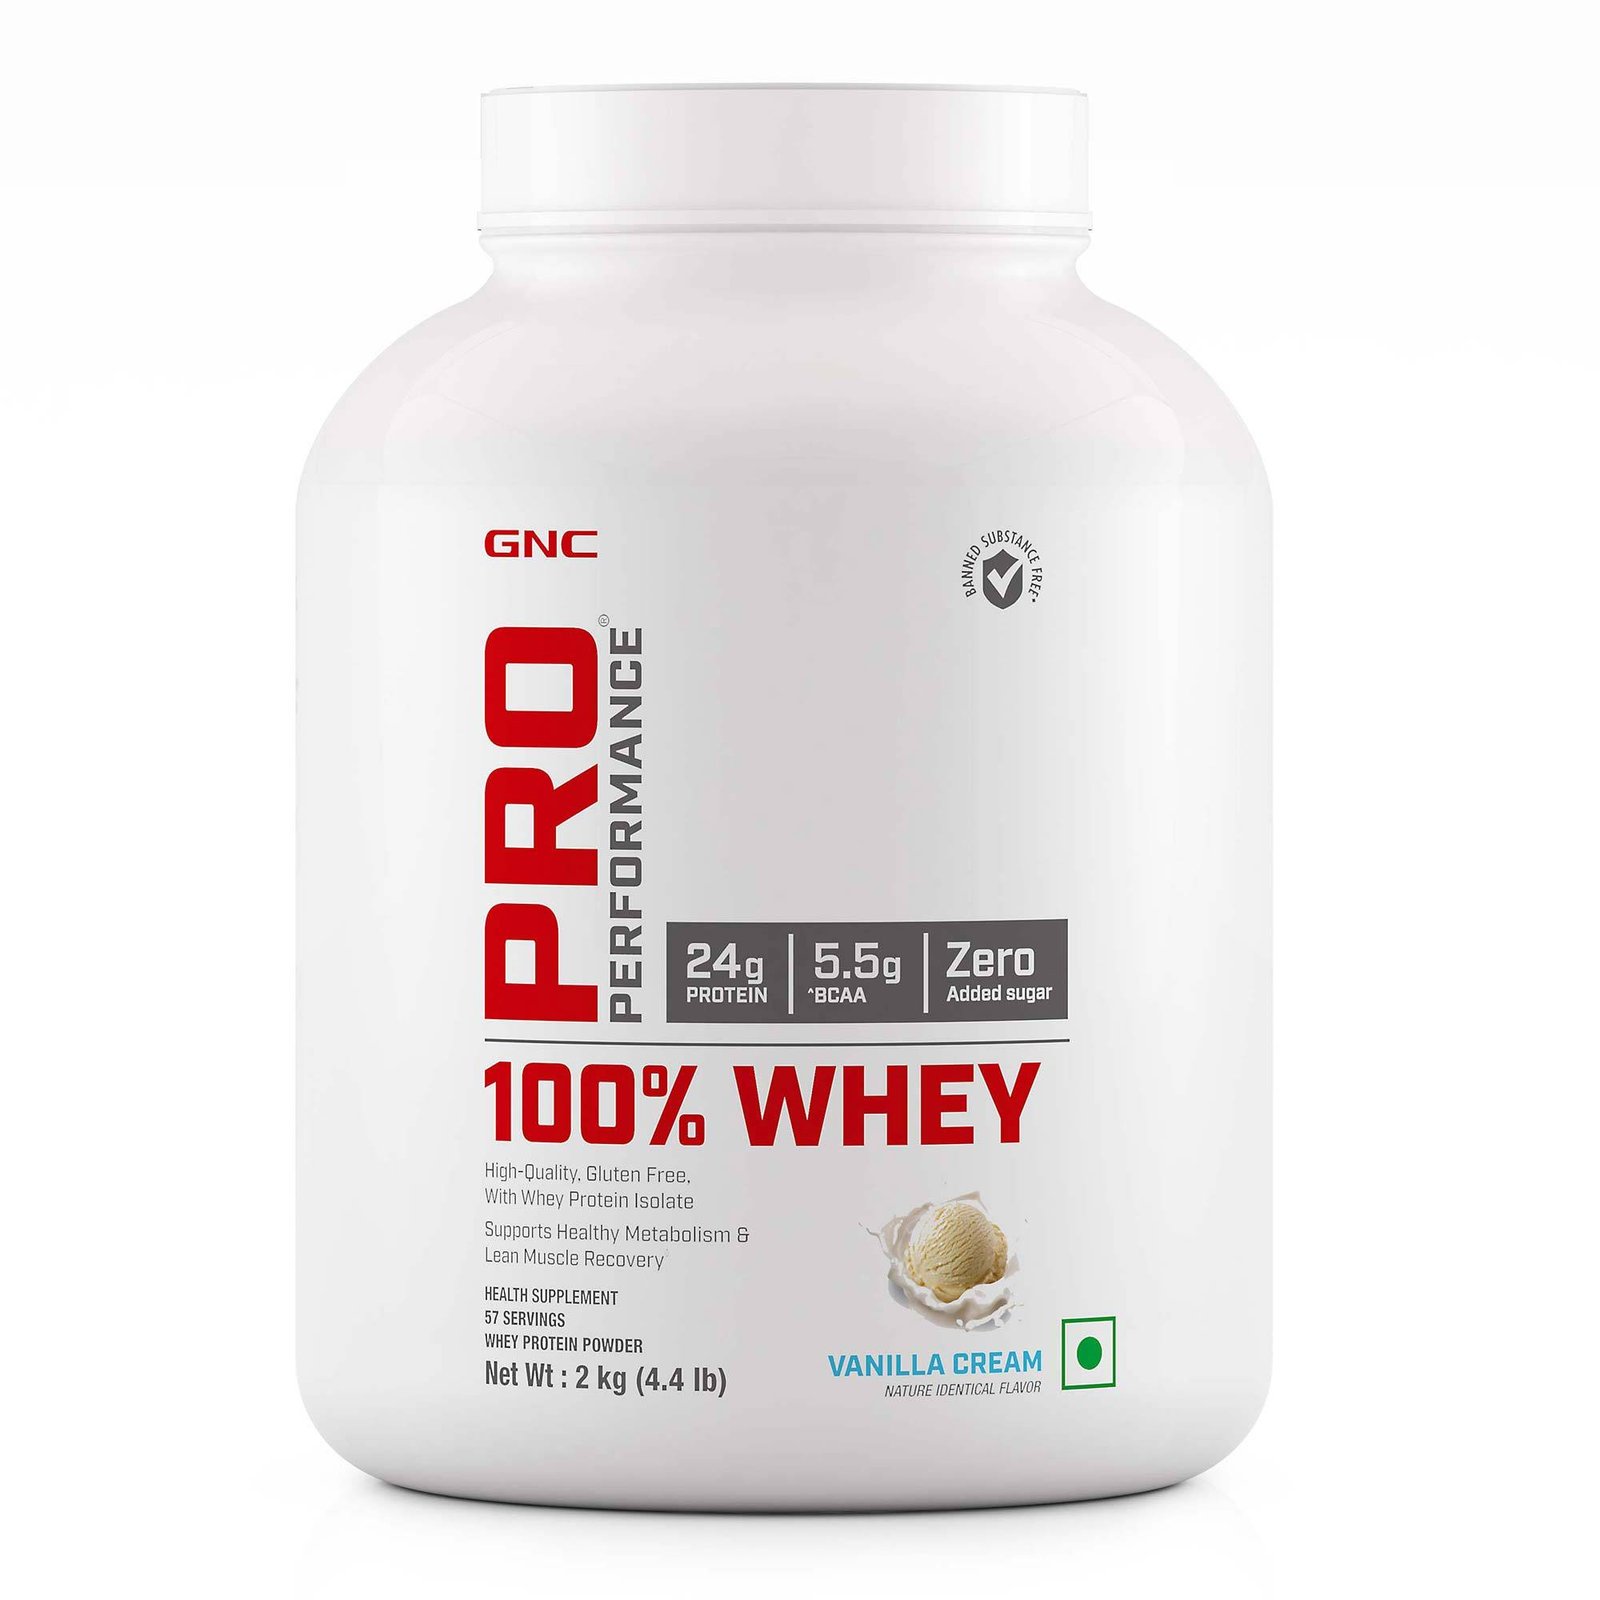 GNC Pro Performance 100% Whey Protein - 4.4 lbs, 2 kg